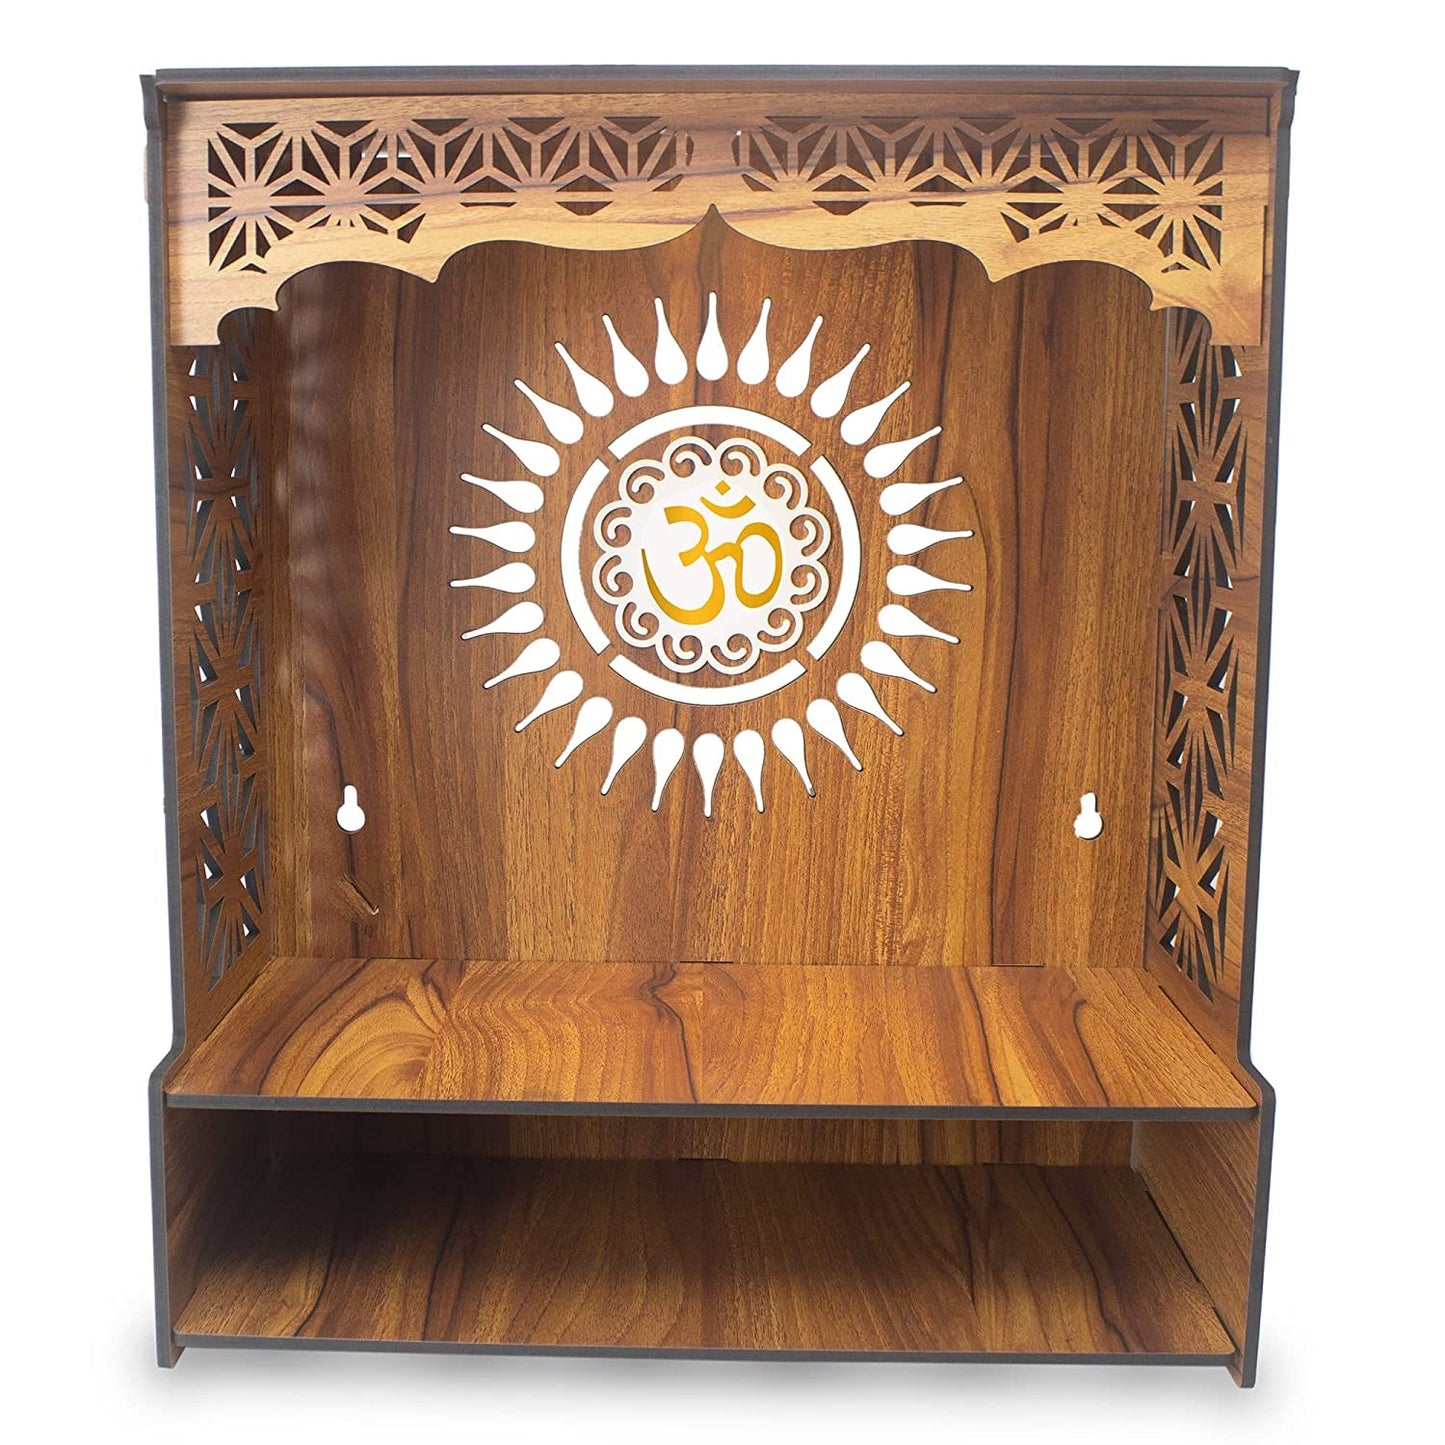 Shree Beautiful Wooden Pooja Stand for Home/Mandir for Home/Temple for Home and Office/Puja Mandir for Home and Office Wall with LED Spot Light/Product